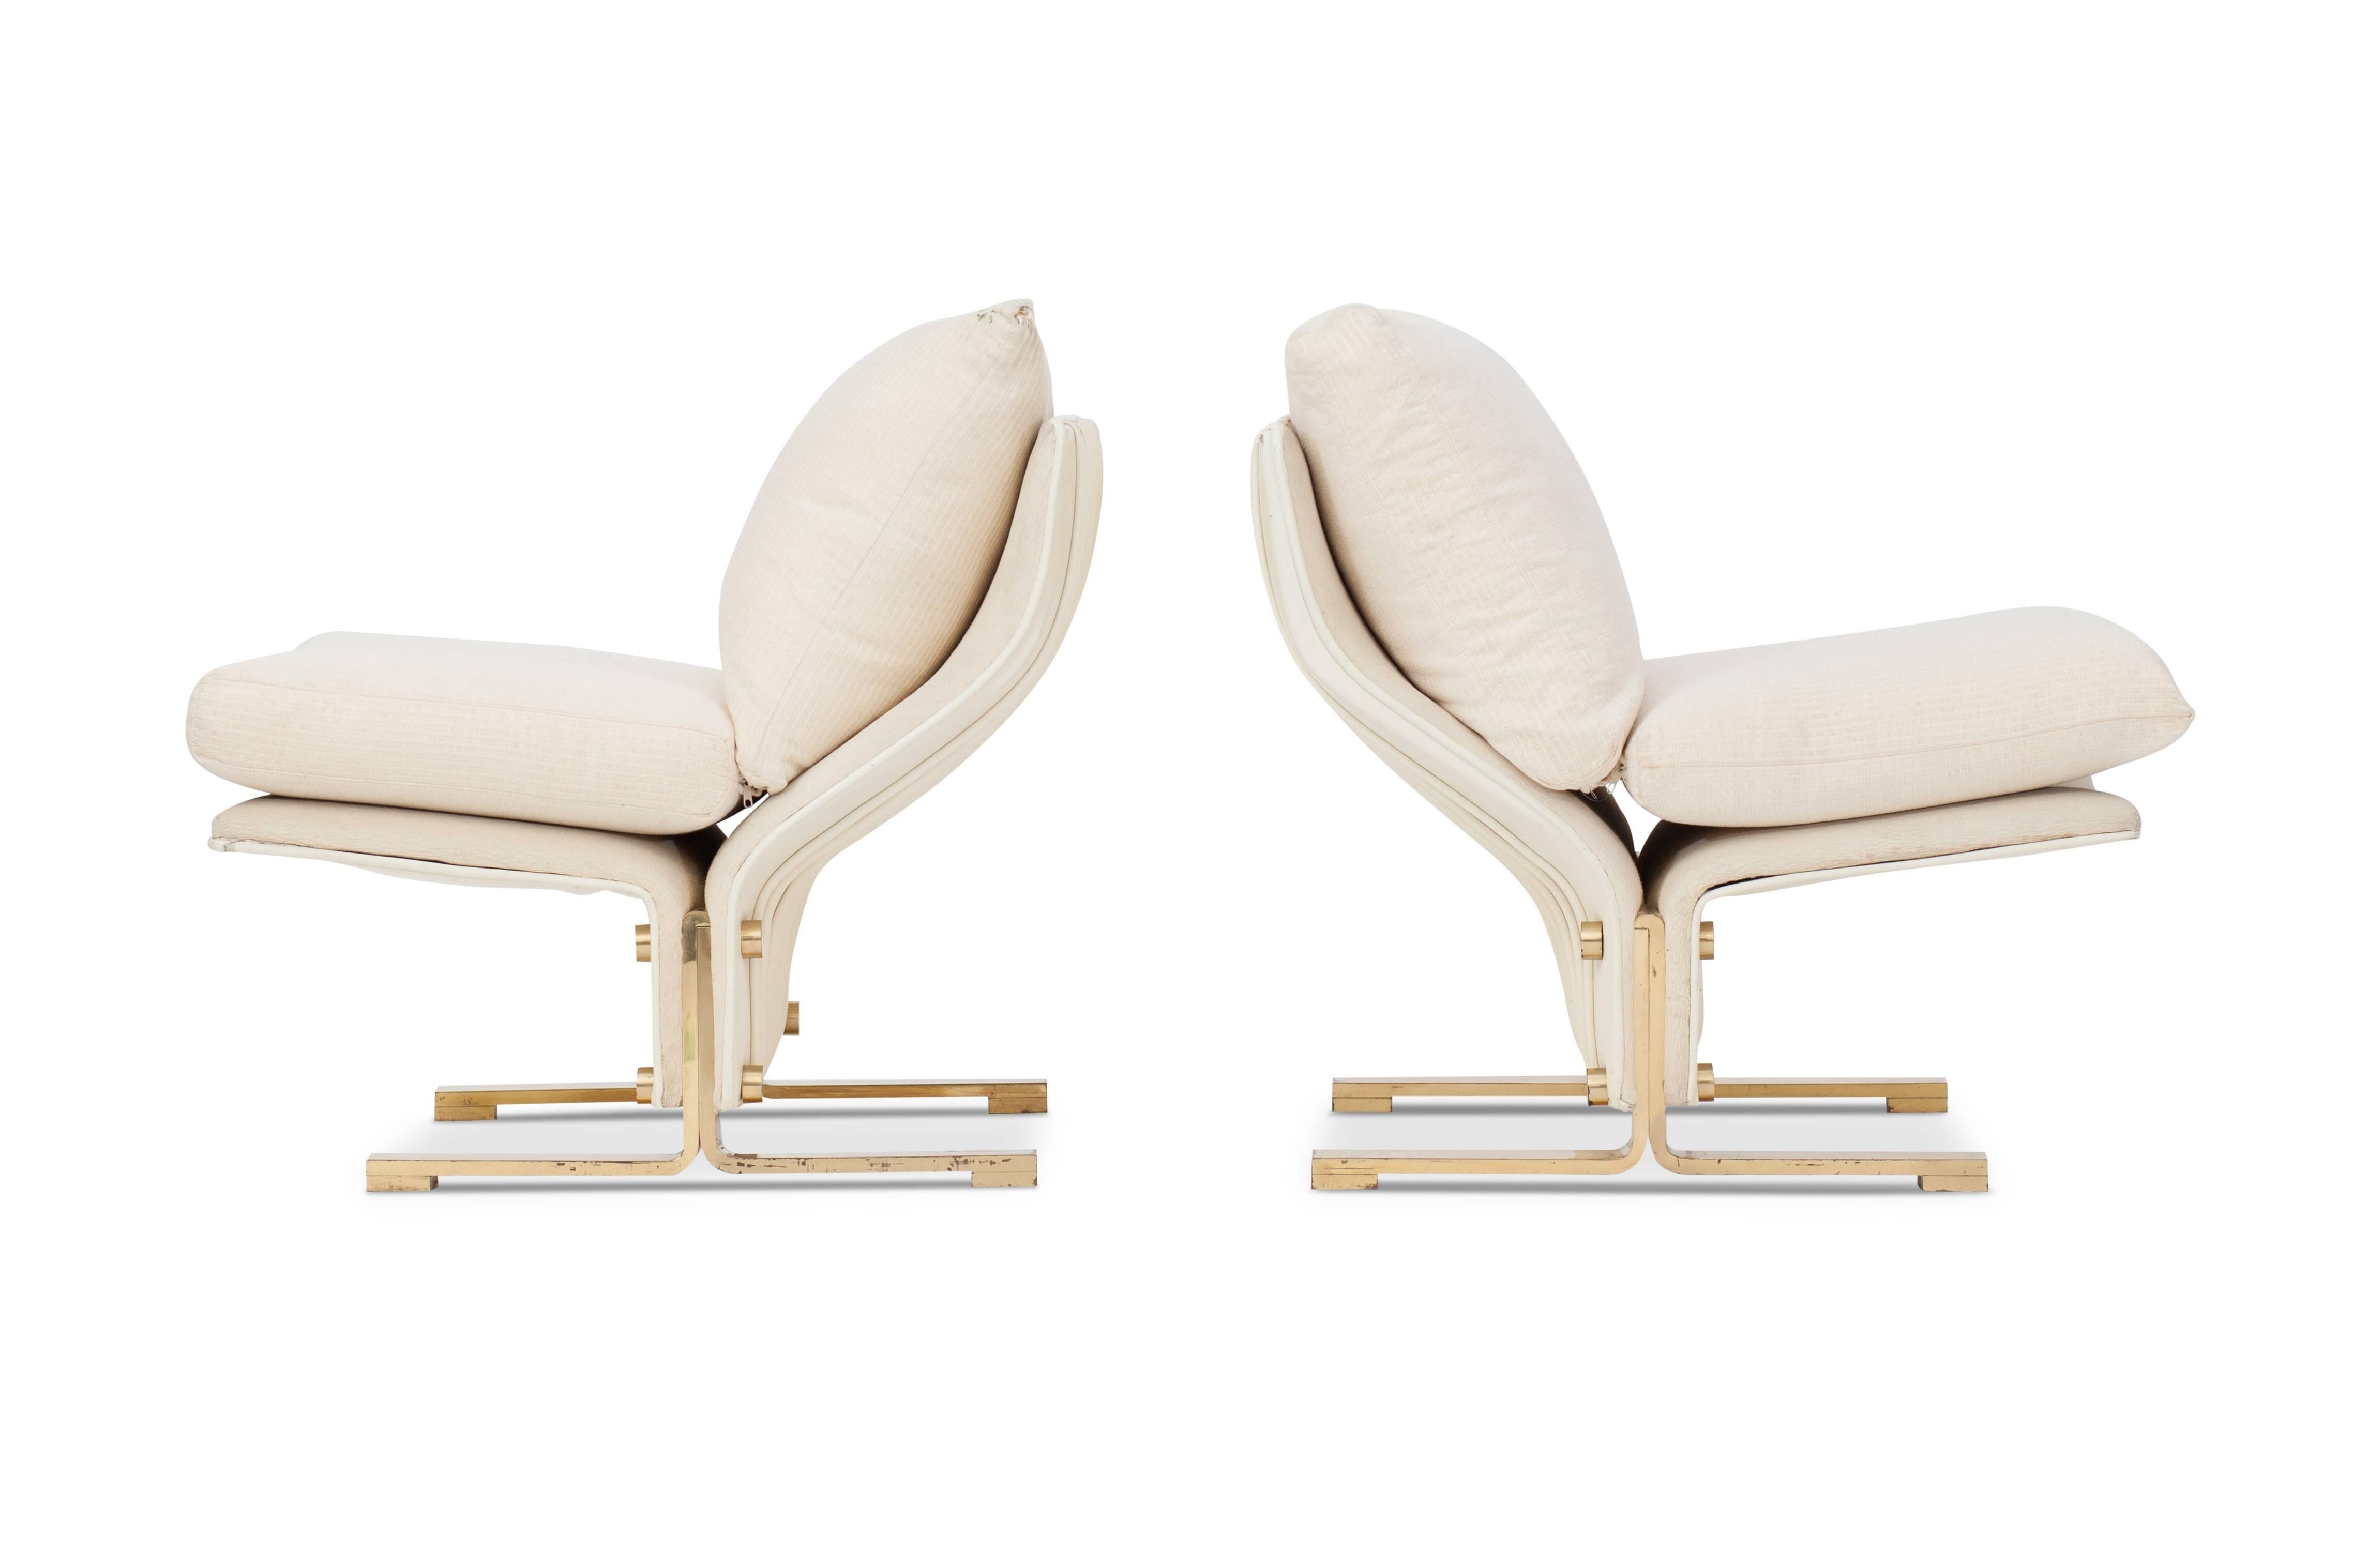 Two lounge chairs in white leather and brass. 

The chairs consist out of two pieces which are cleverly joined together. The thick white upholstered cushions create an enormous amount of comfort.

by Marzio Cecchi, Italy 1960s.